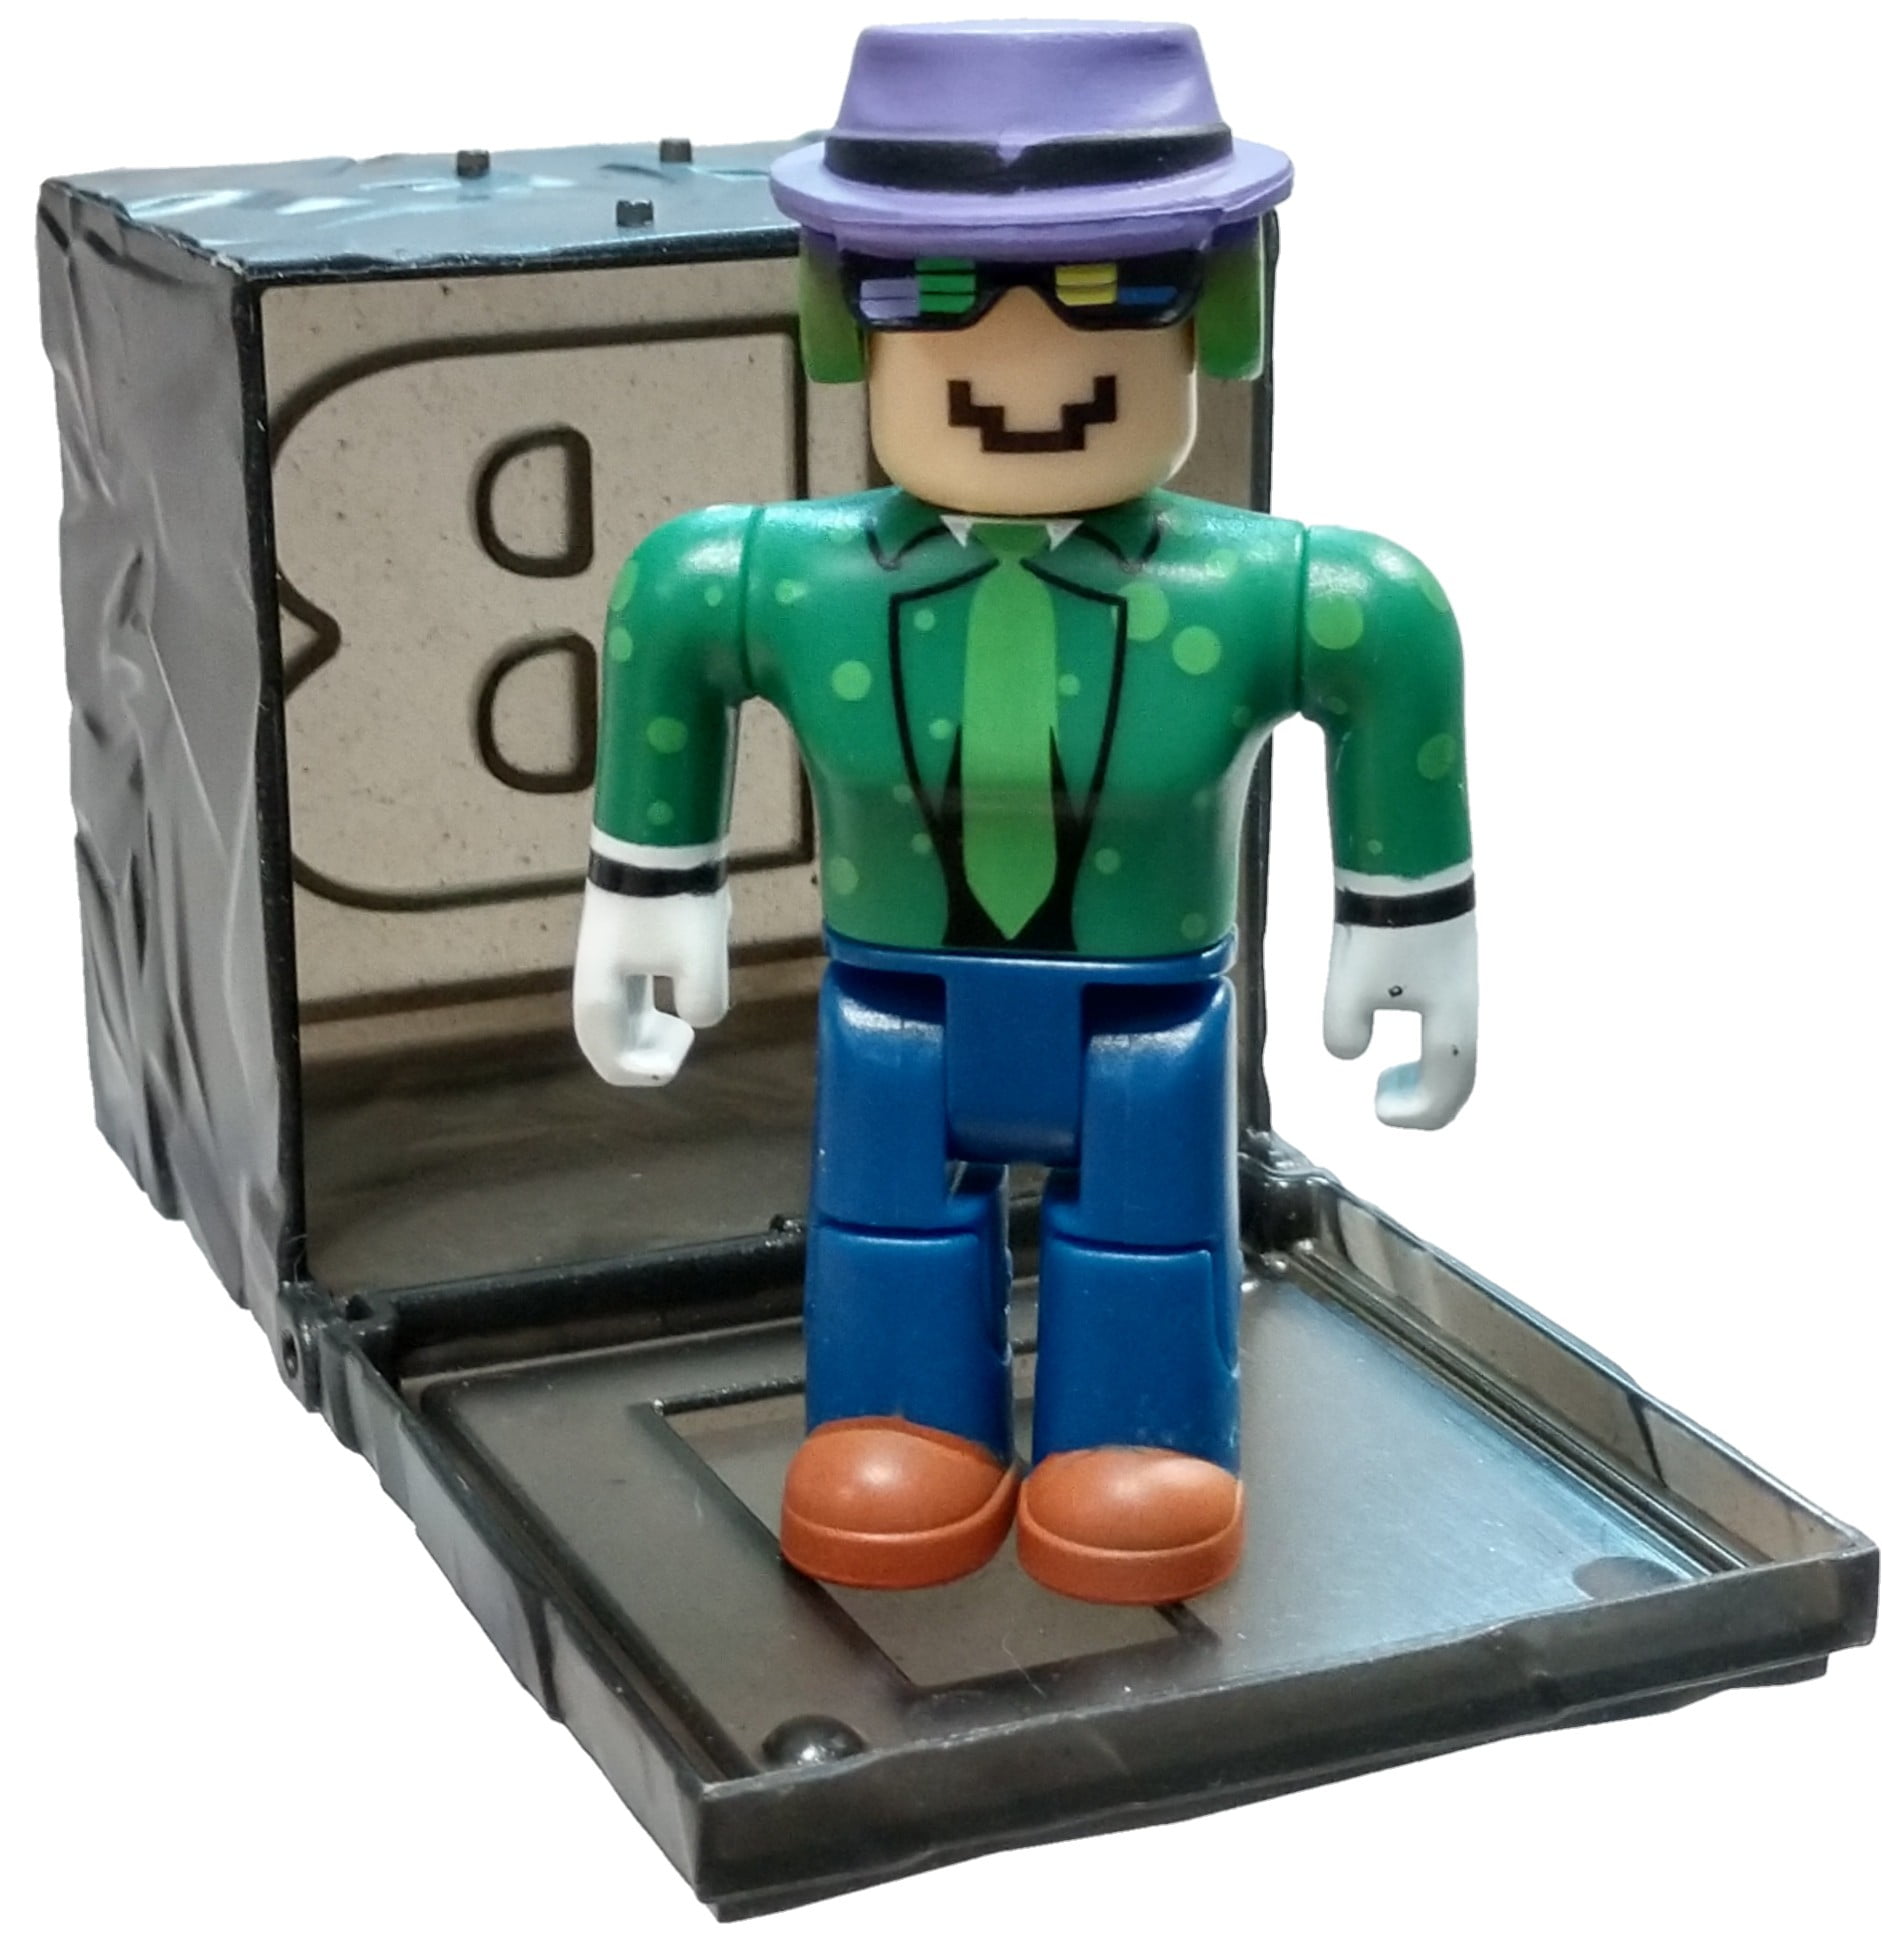 Roblox Series 7 Mrwindy Mini Figure With Black Cube And Online Code No Packaging Walmart Com Walmart Com - roblox celebrity collection series 5 ozzypig mini figure with red cube and online code no packaging walmart com walmart com